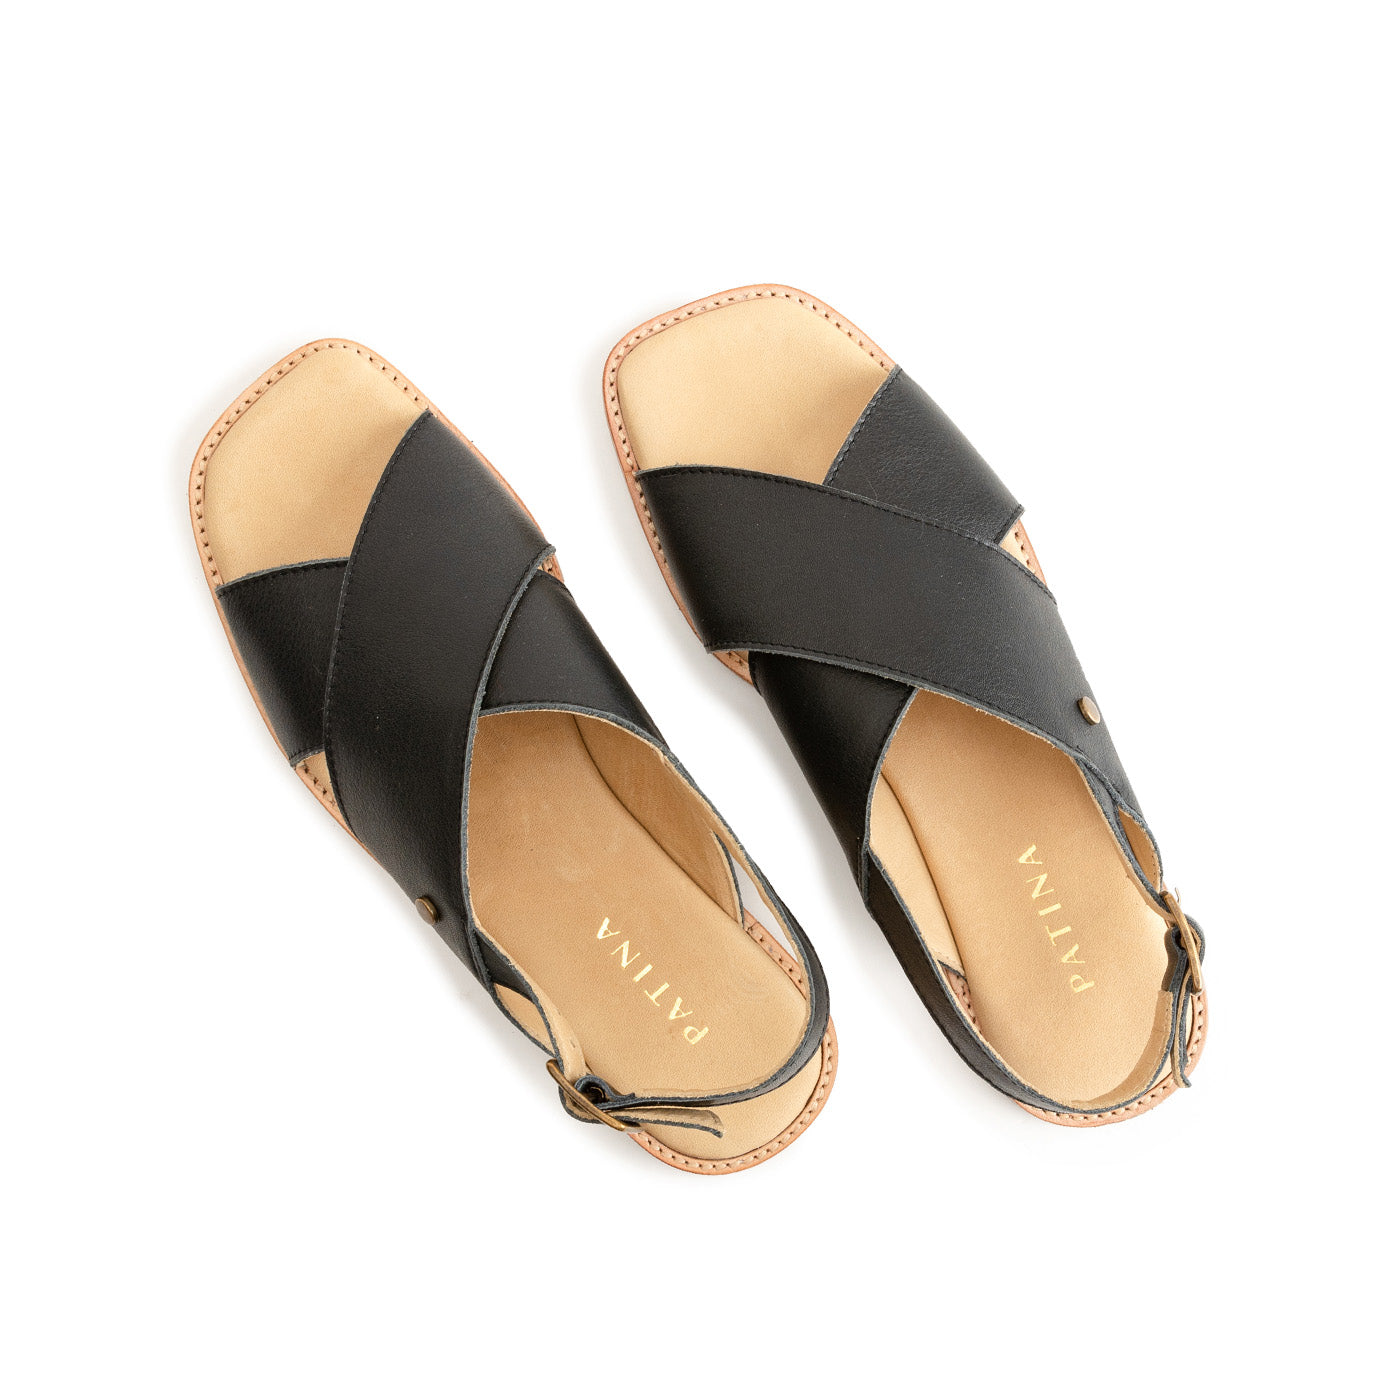 White Criss-Cross Strap Sandals · Filly Flair